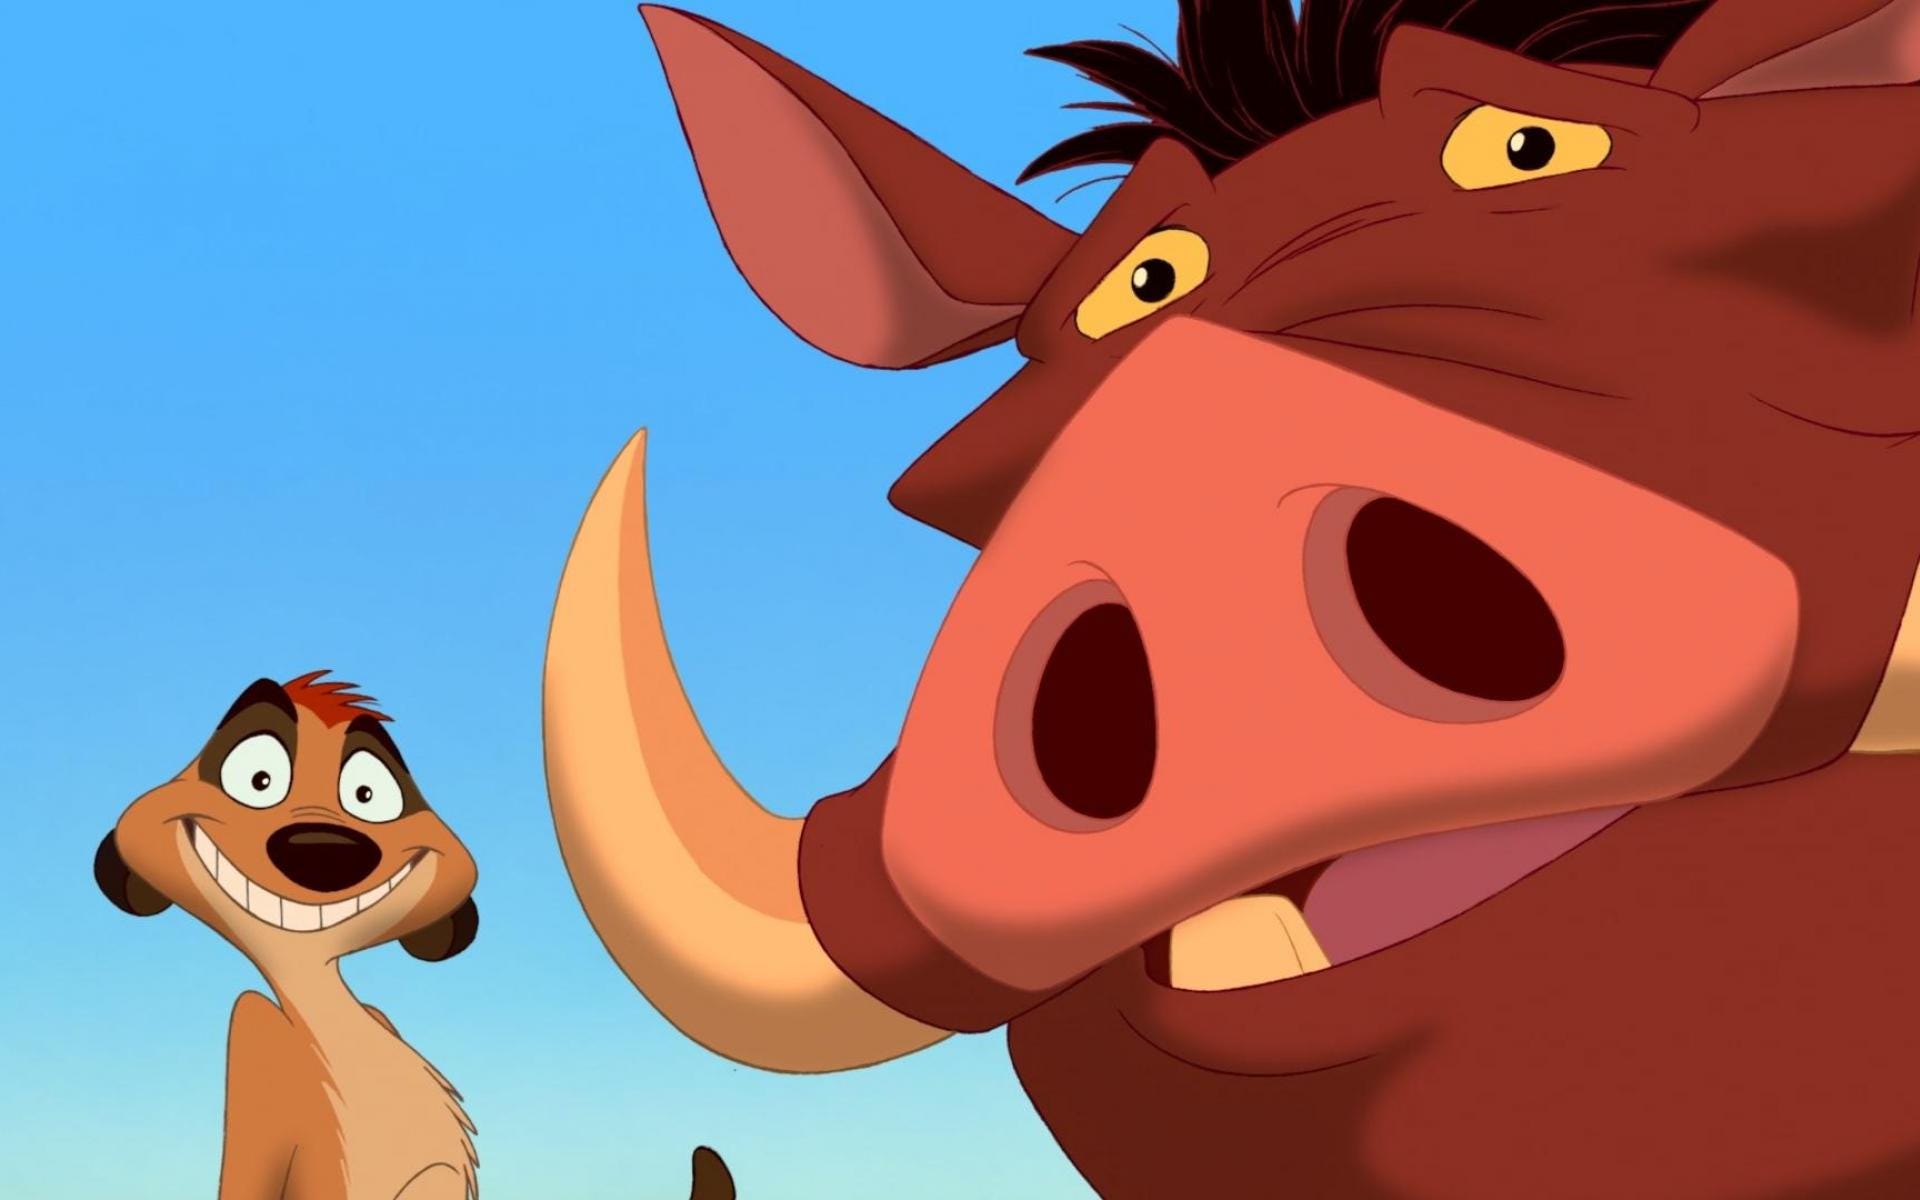 Timon and Pumbaa, some of Disney's most iconic comic relief characters.